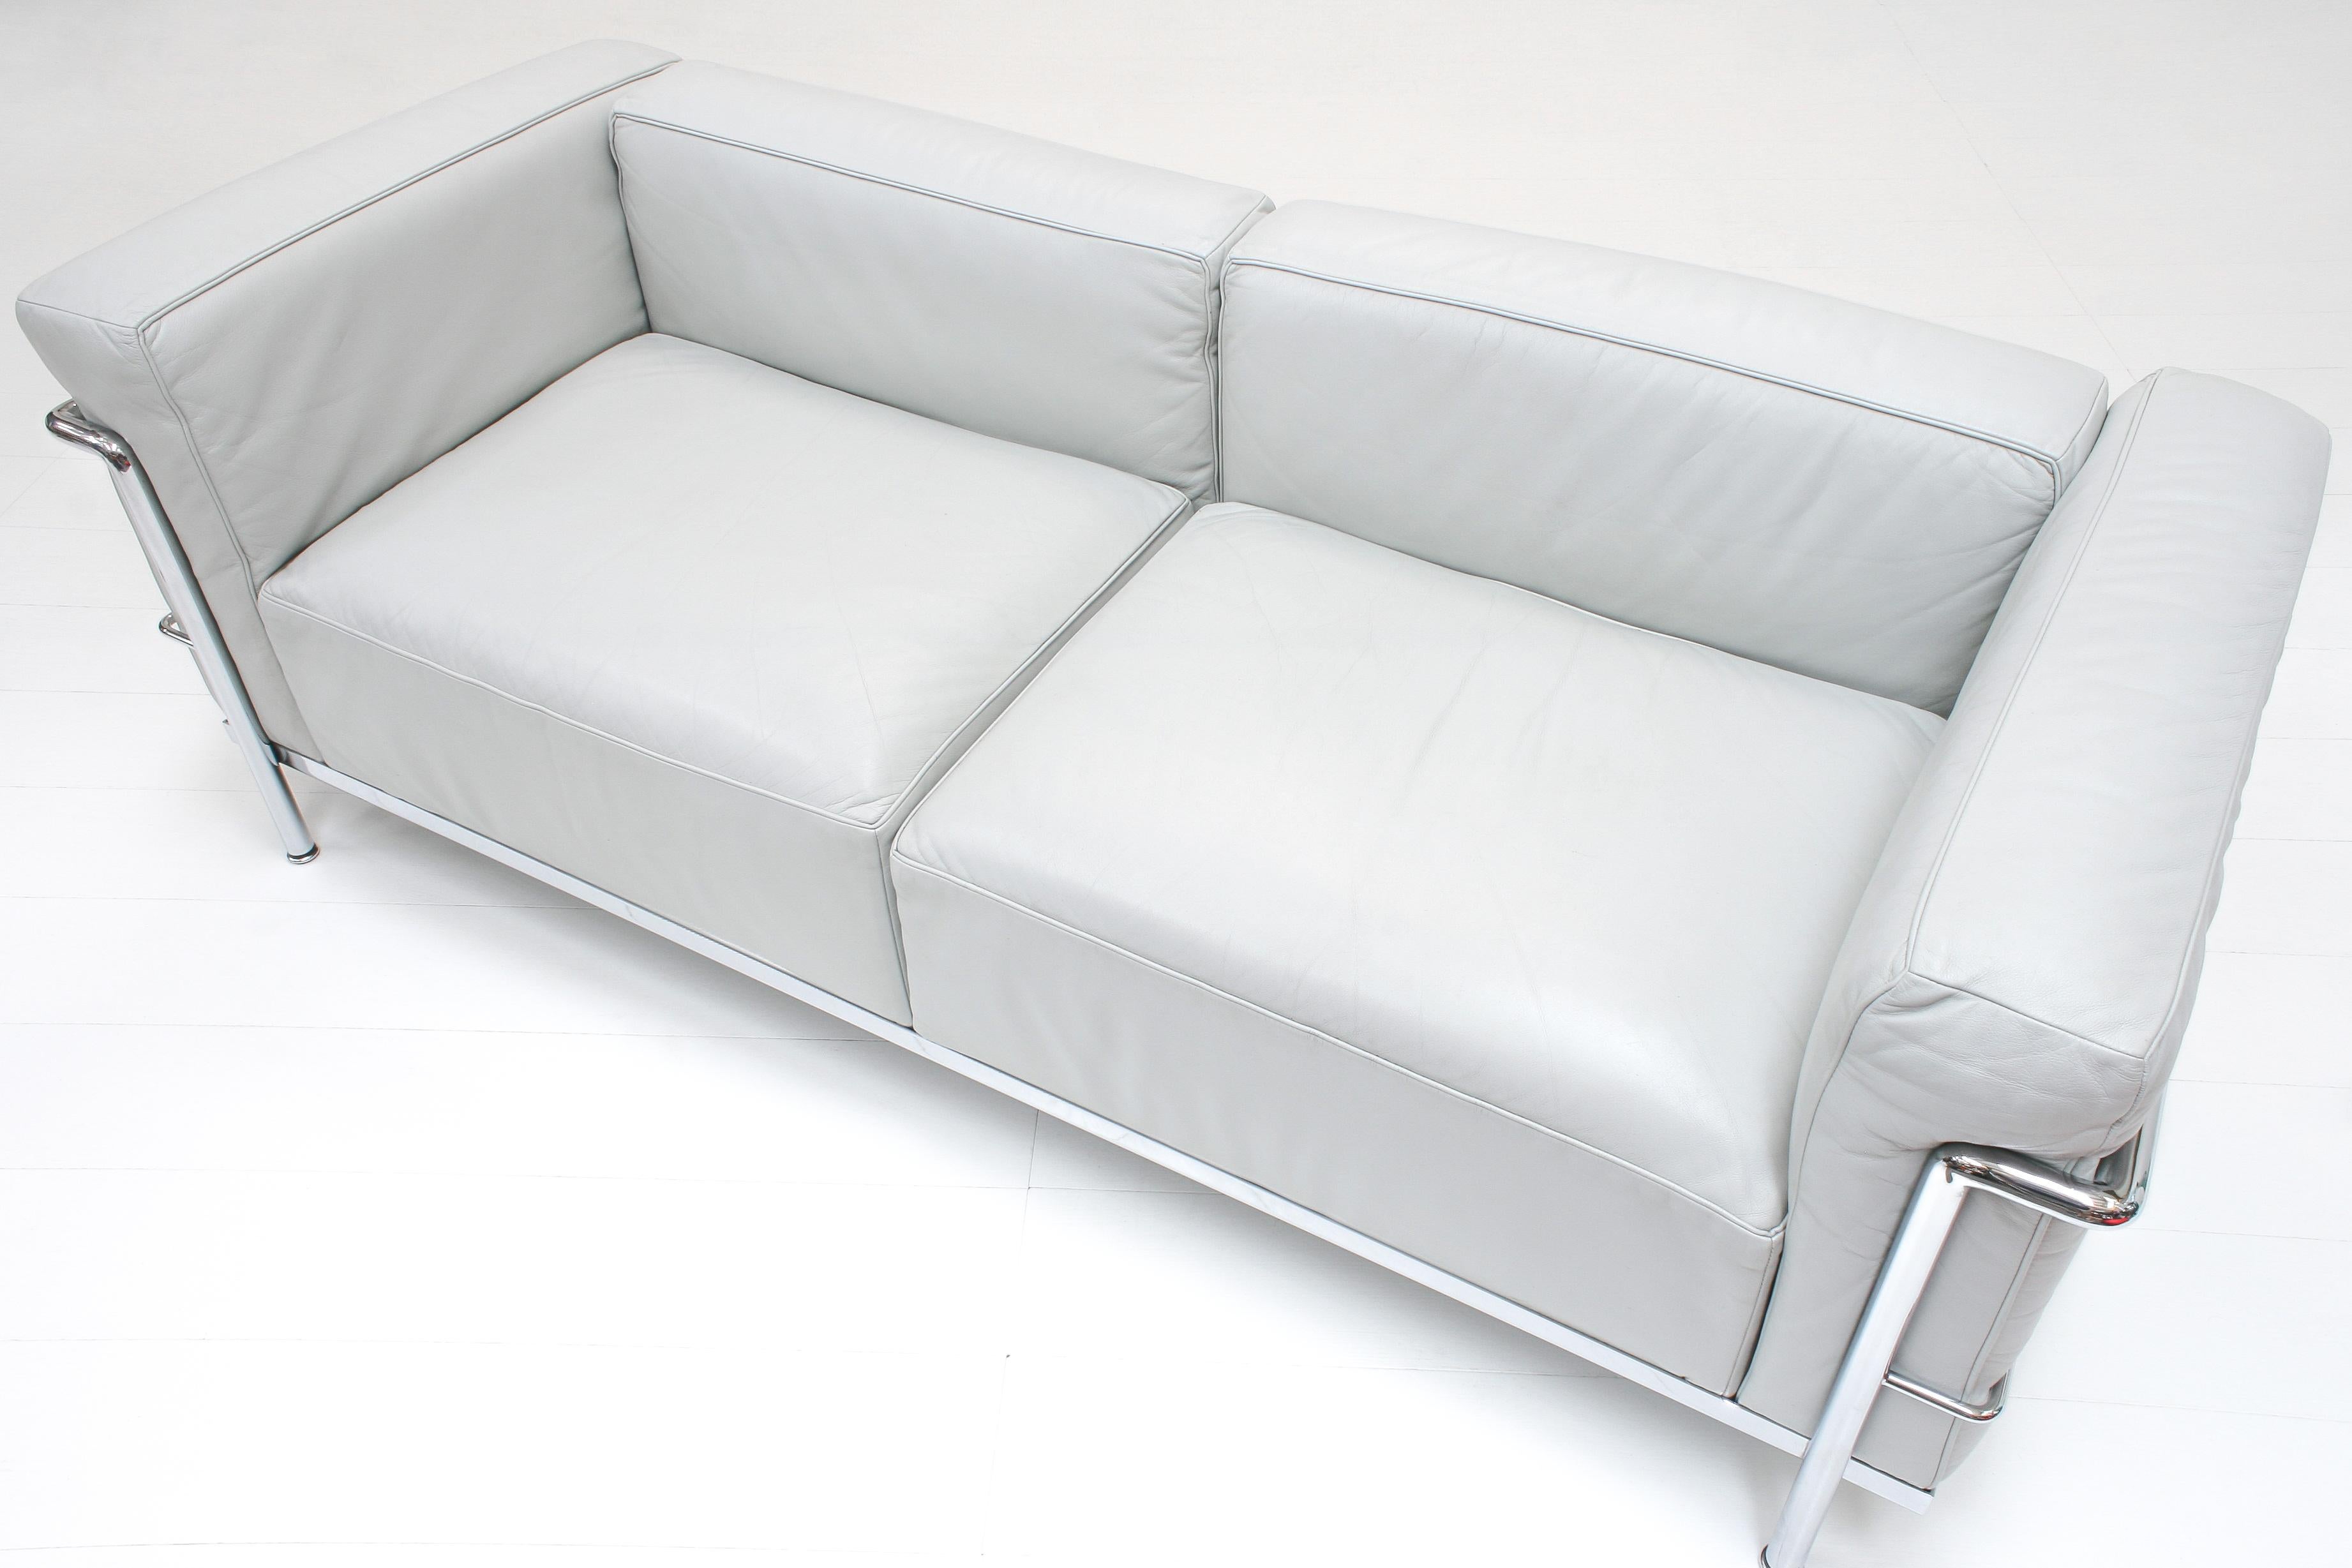 Bauhaus Leather LC3 Grand Confort Sofa by Le Corbusier & C. Perriand for Cassina (1/2) For Sale